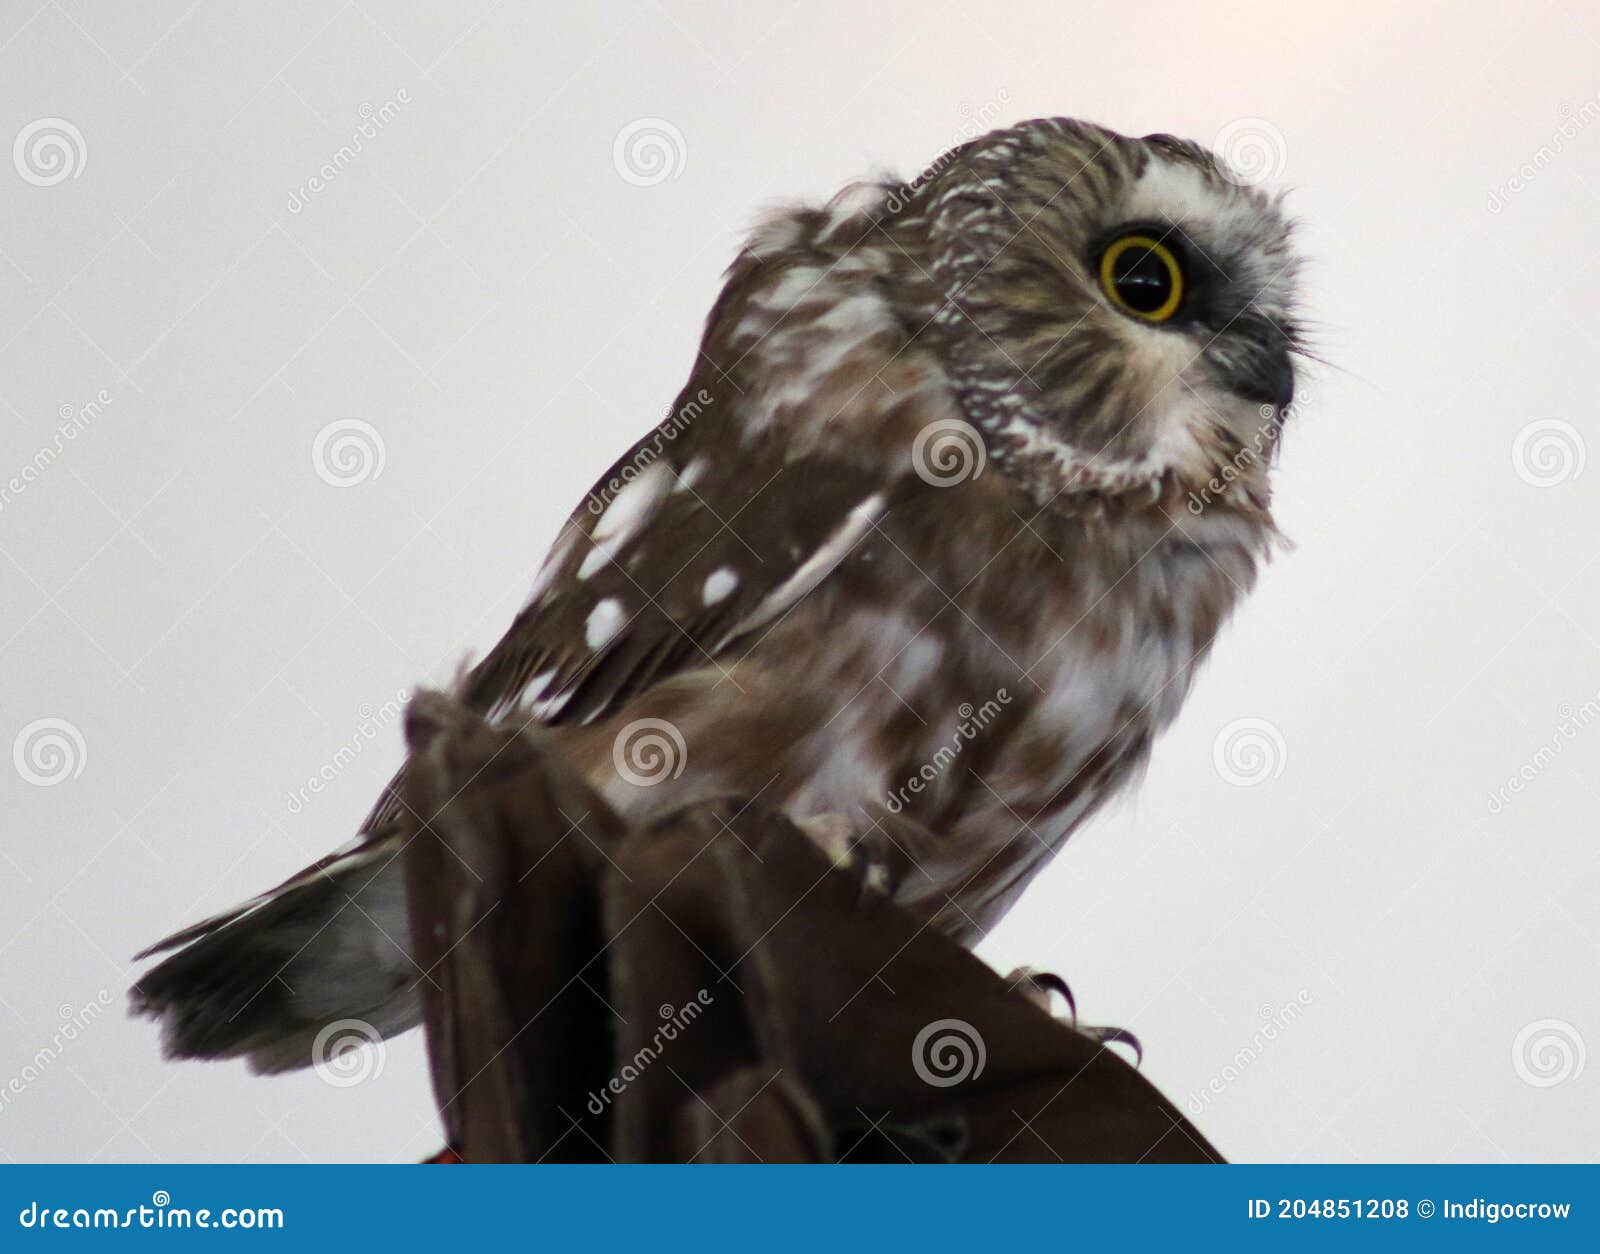 northern saw- whet owl